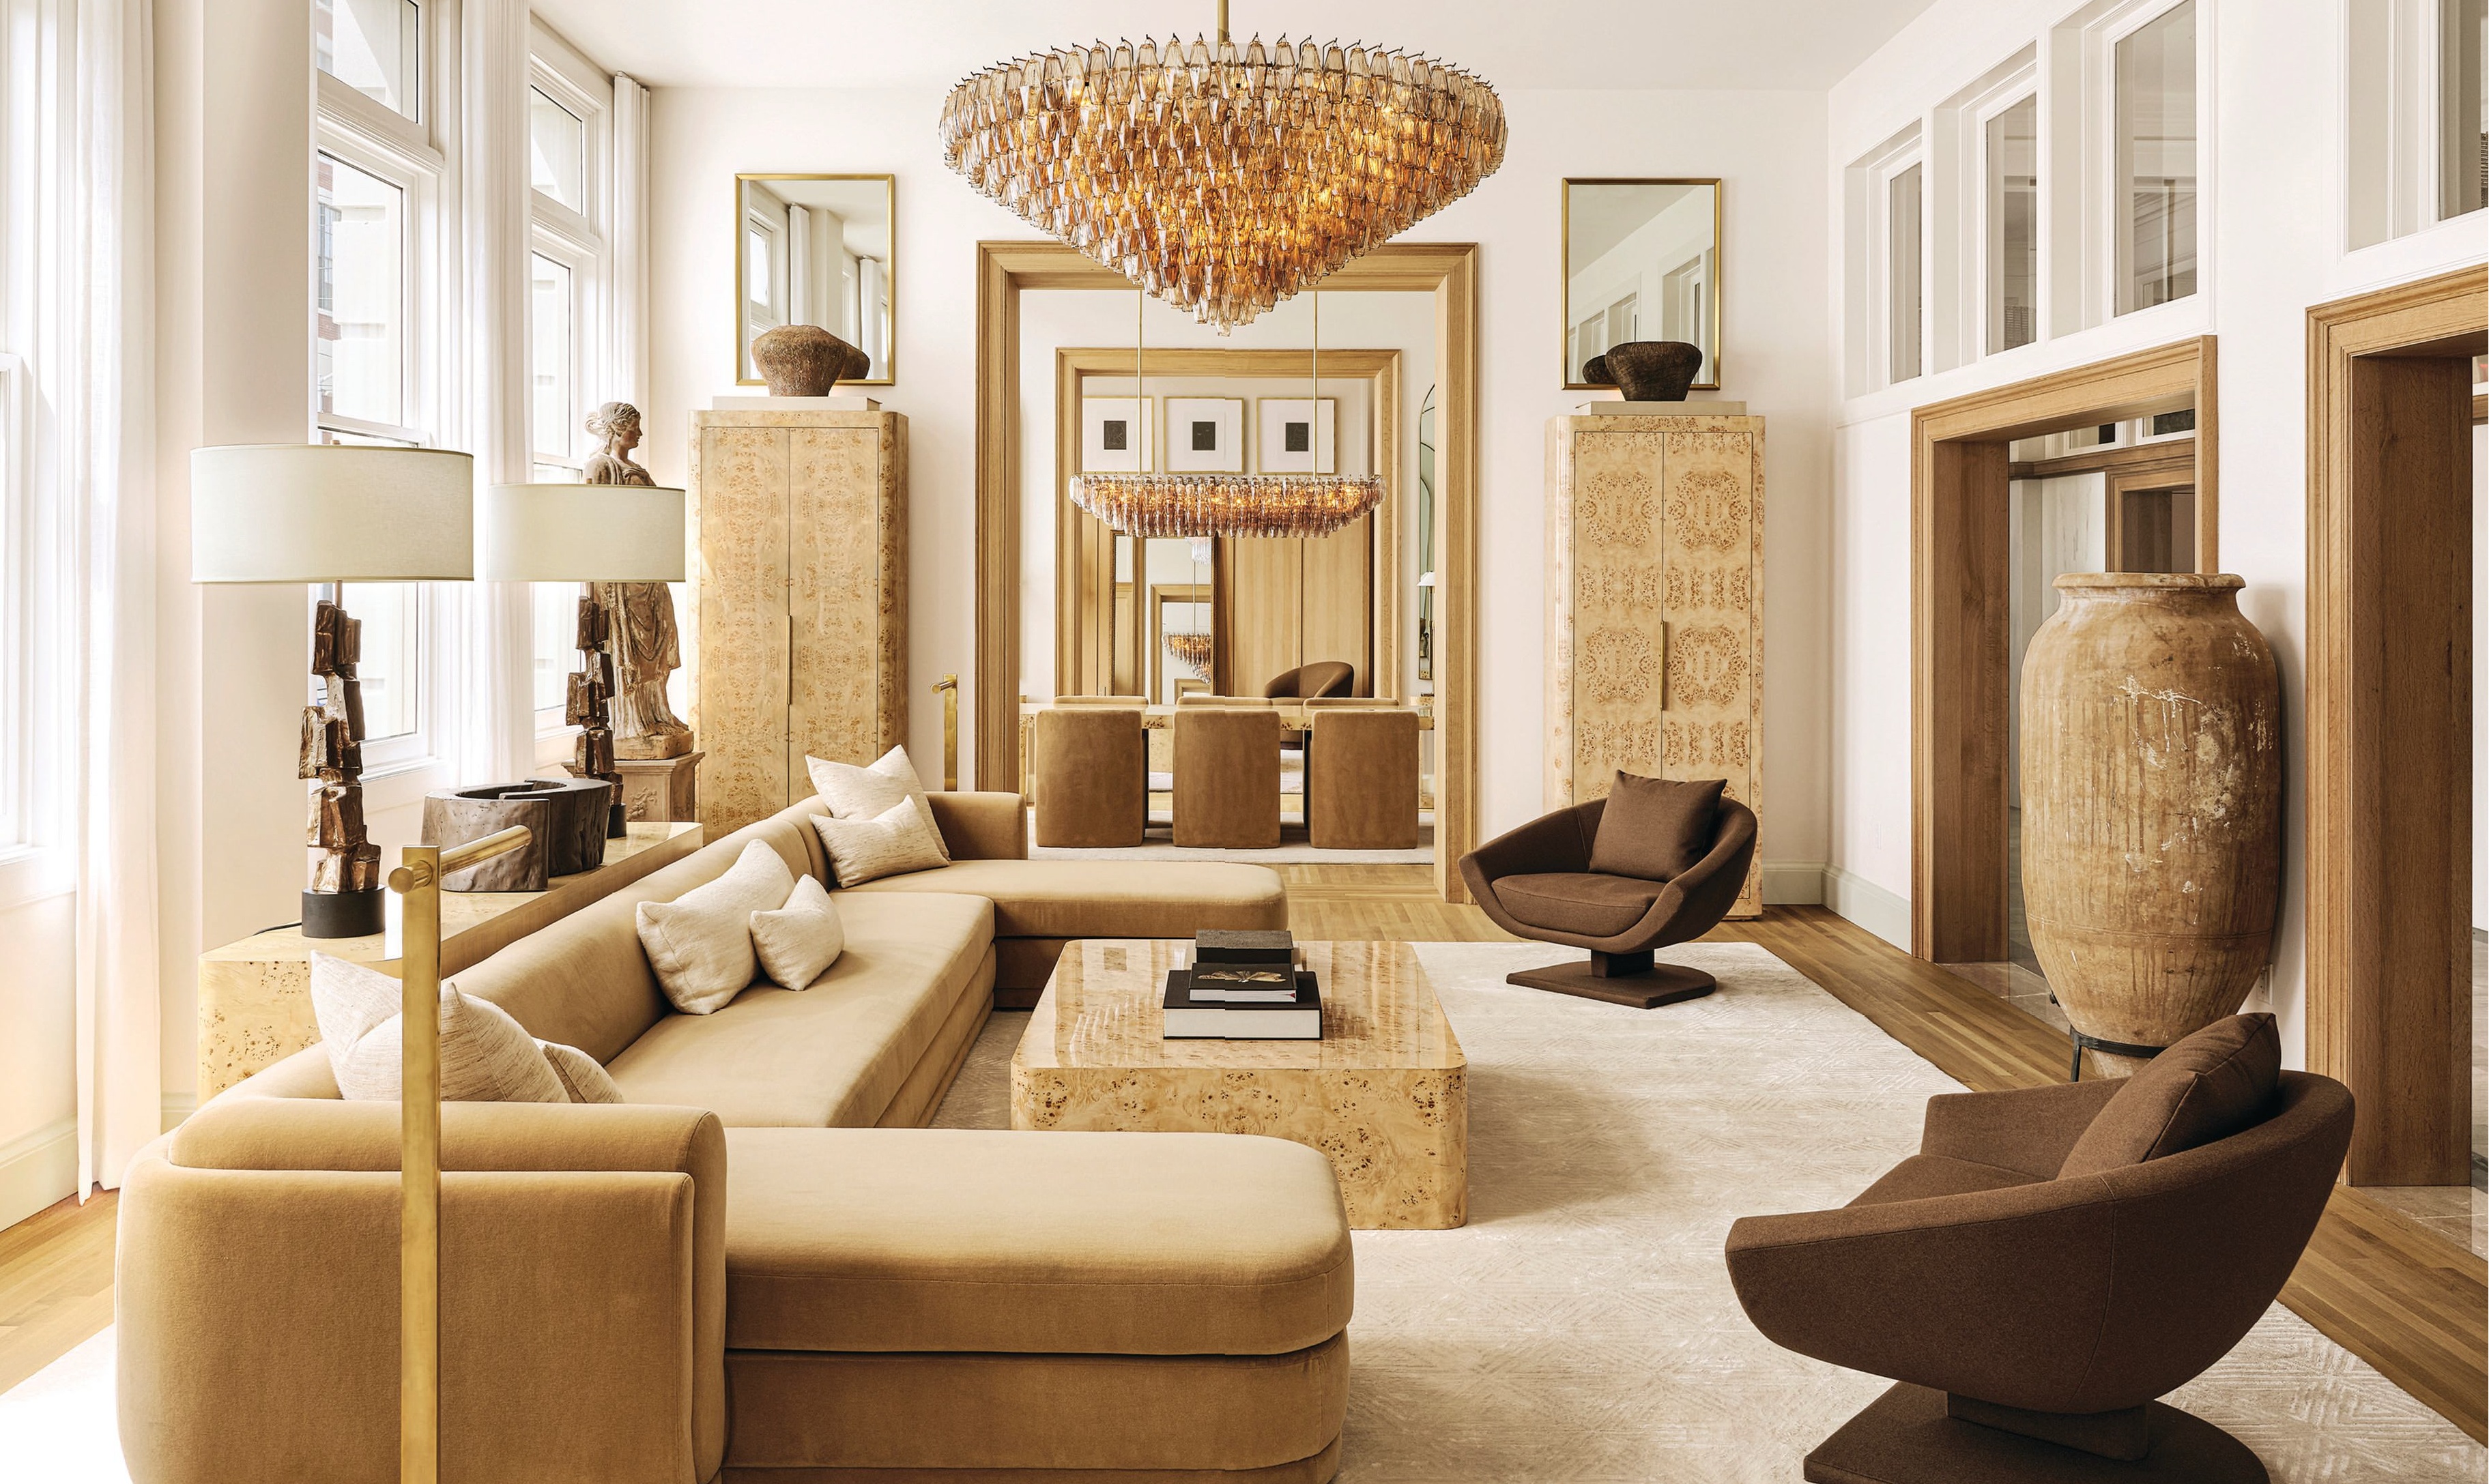 The new RH showcases luxe furniture installations in gallery settings. PHOTO COURTESY OF RH